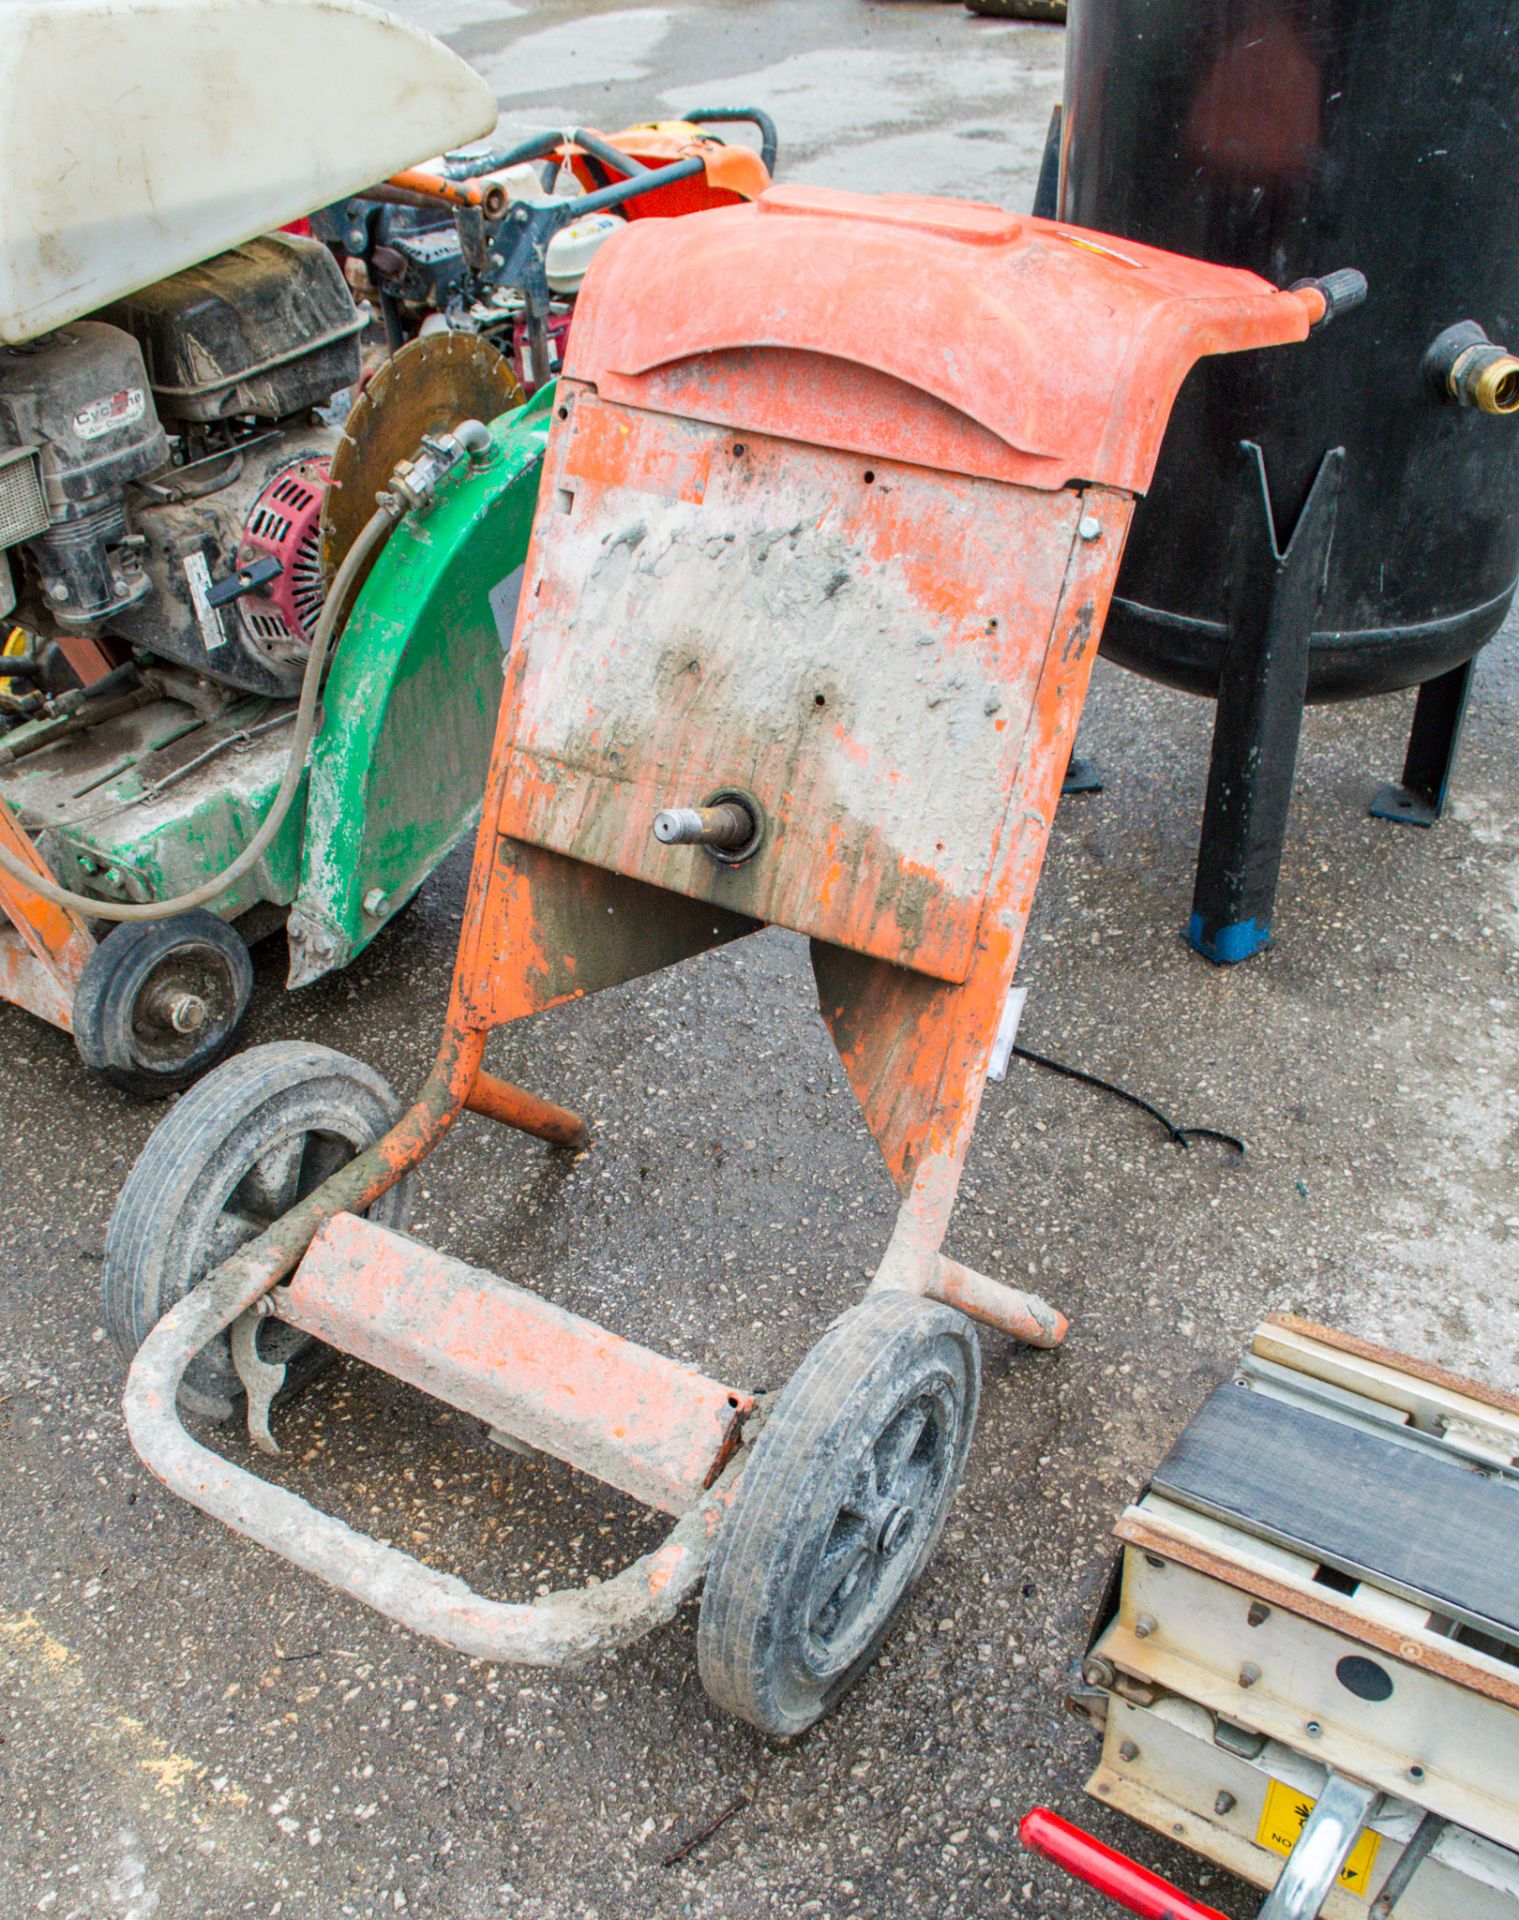 Belle Minimix petrol driven cement mixer for spares ** No barrel and engine parts missing **